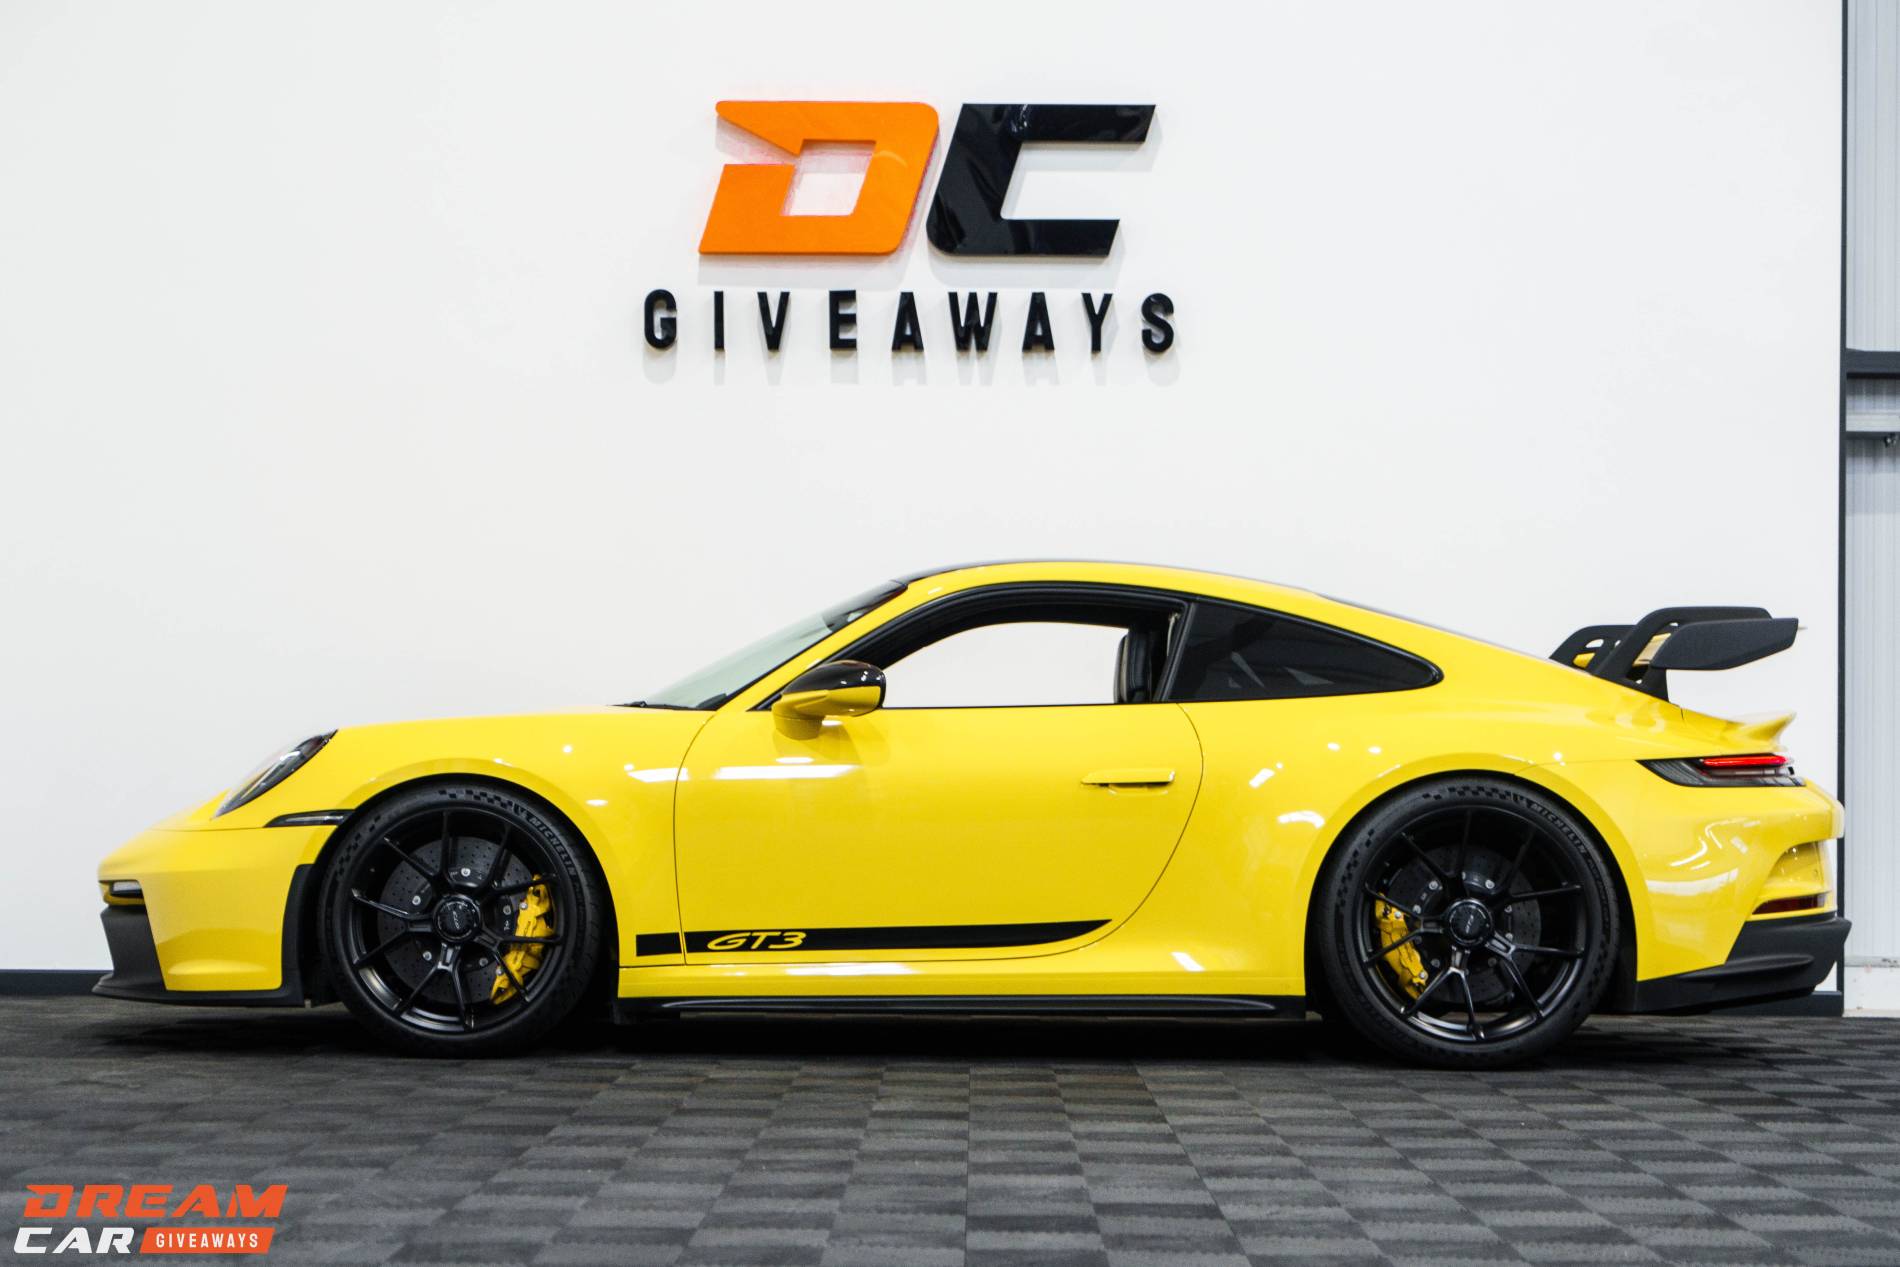 Win this Porsche 992 GT3 & £5,000 or £165,000 Tax Free - 100 Instant Prizes